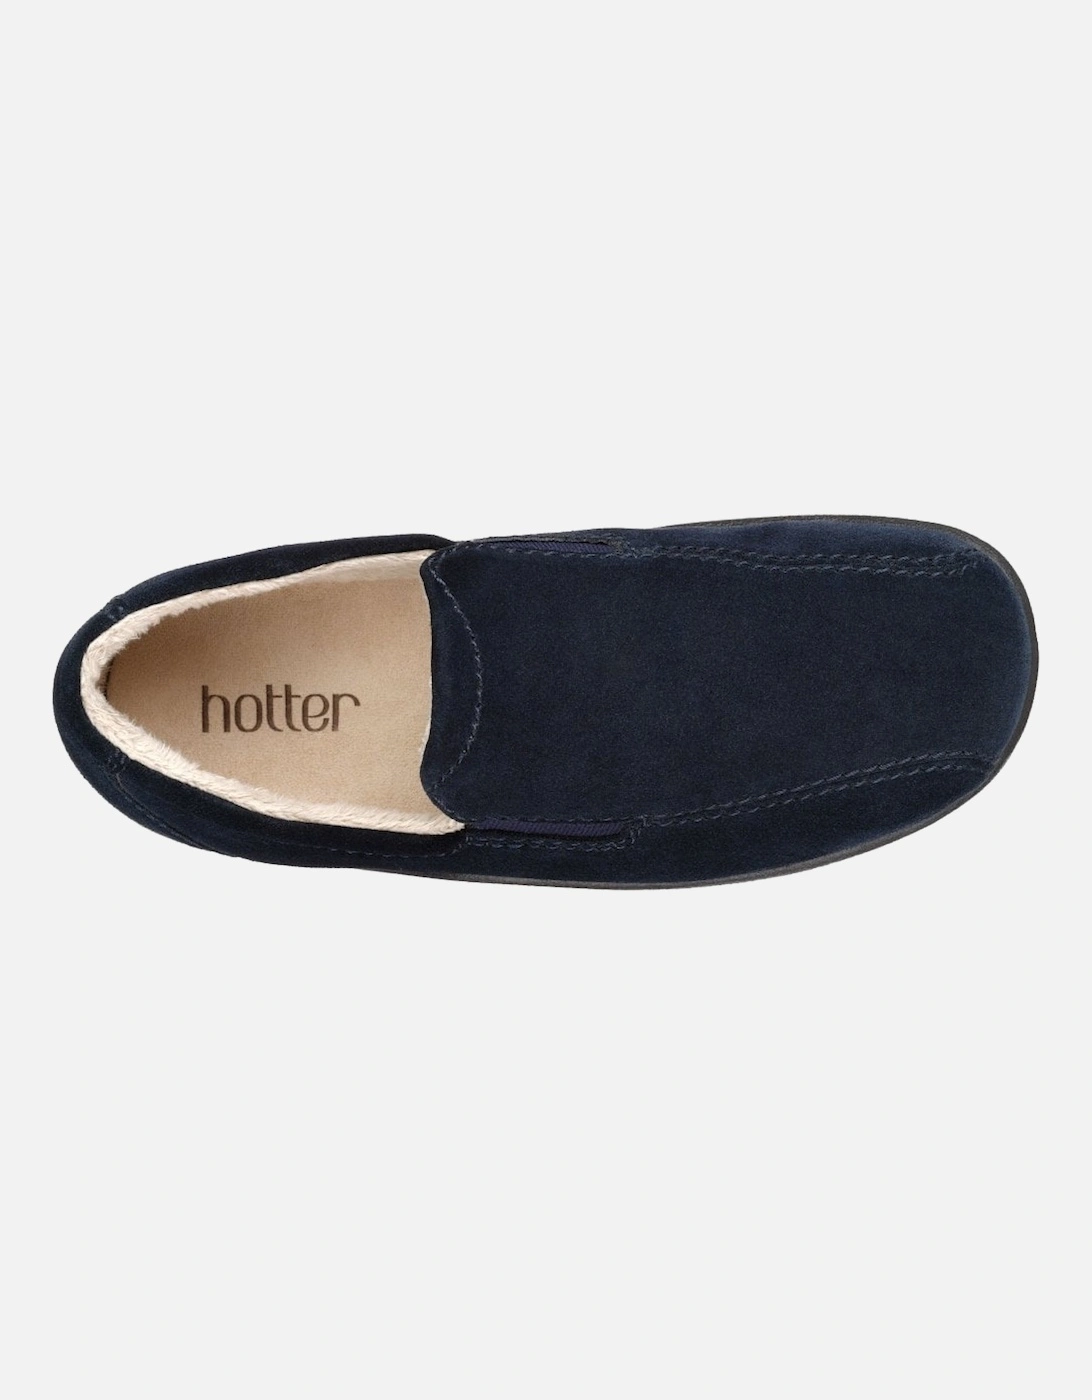 Relax Mens Warm Lined Slippers